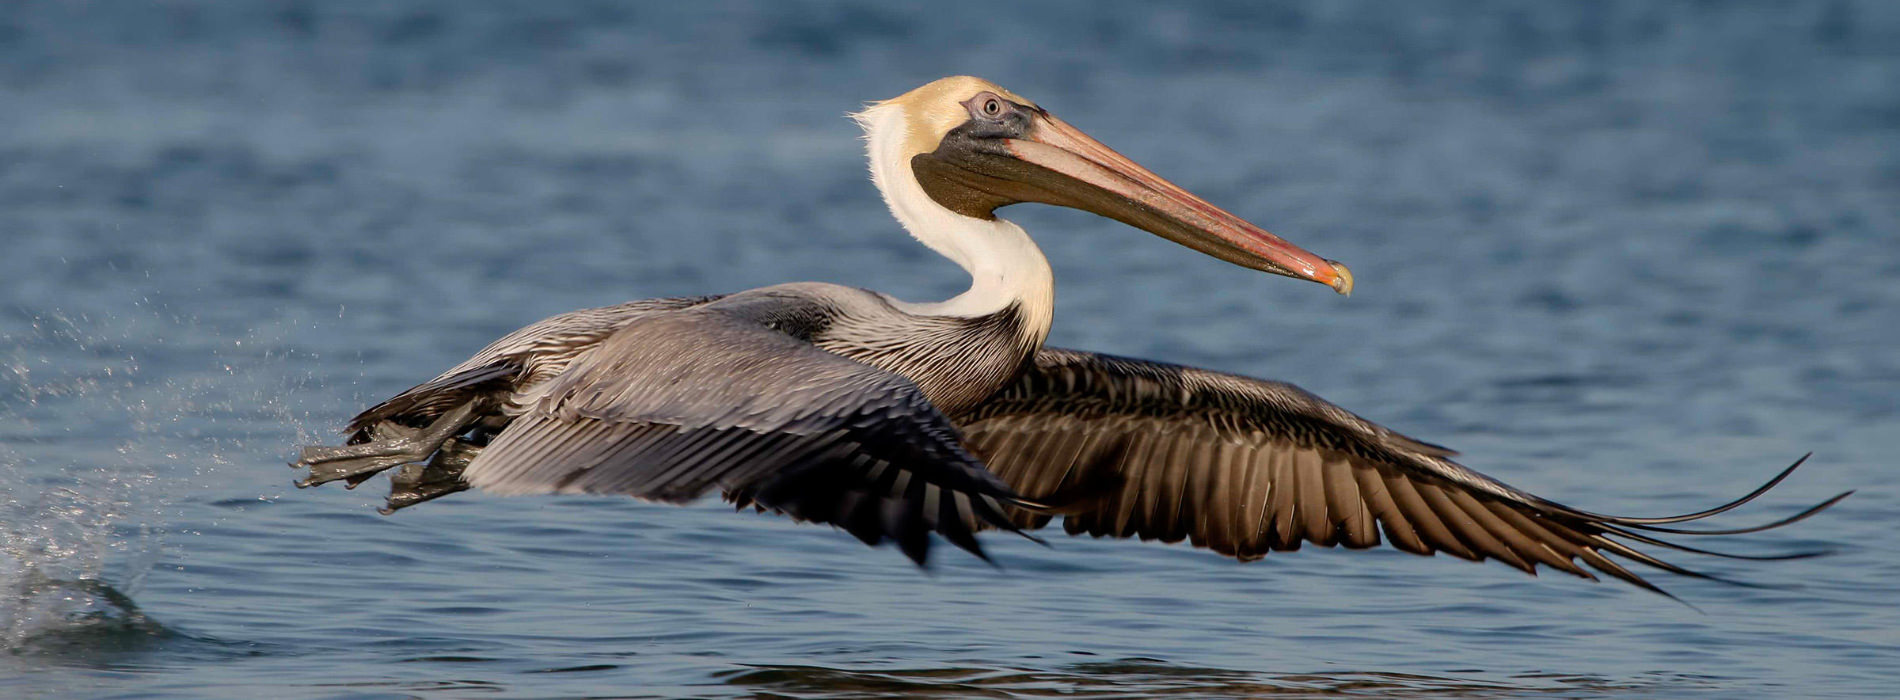 A brown pelican flies just above the surface of the water